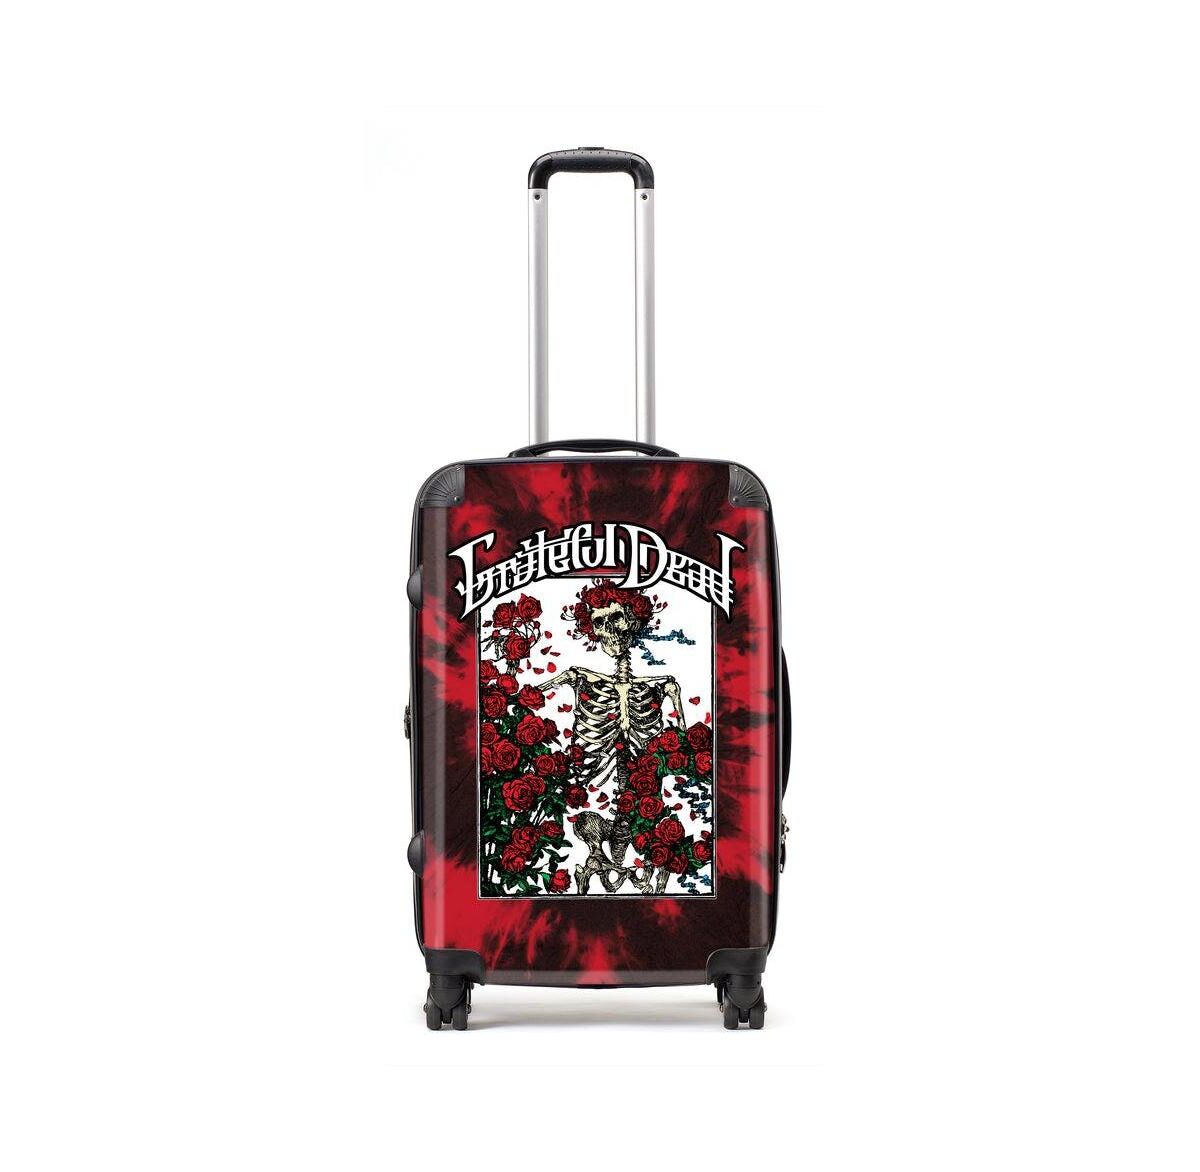 Rocksax Grateful Dead Tour Series Luggage - Bertha Skeleton - Small - Carry On - Multi-colored